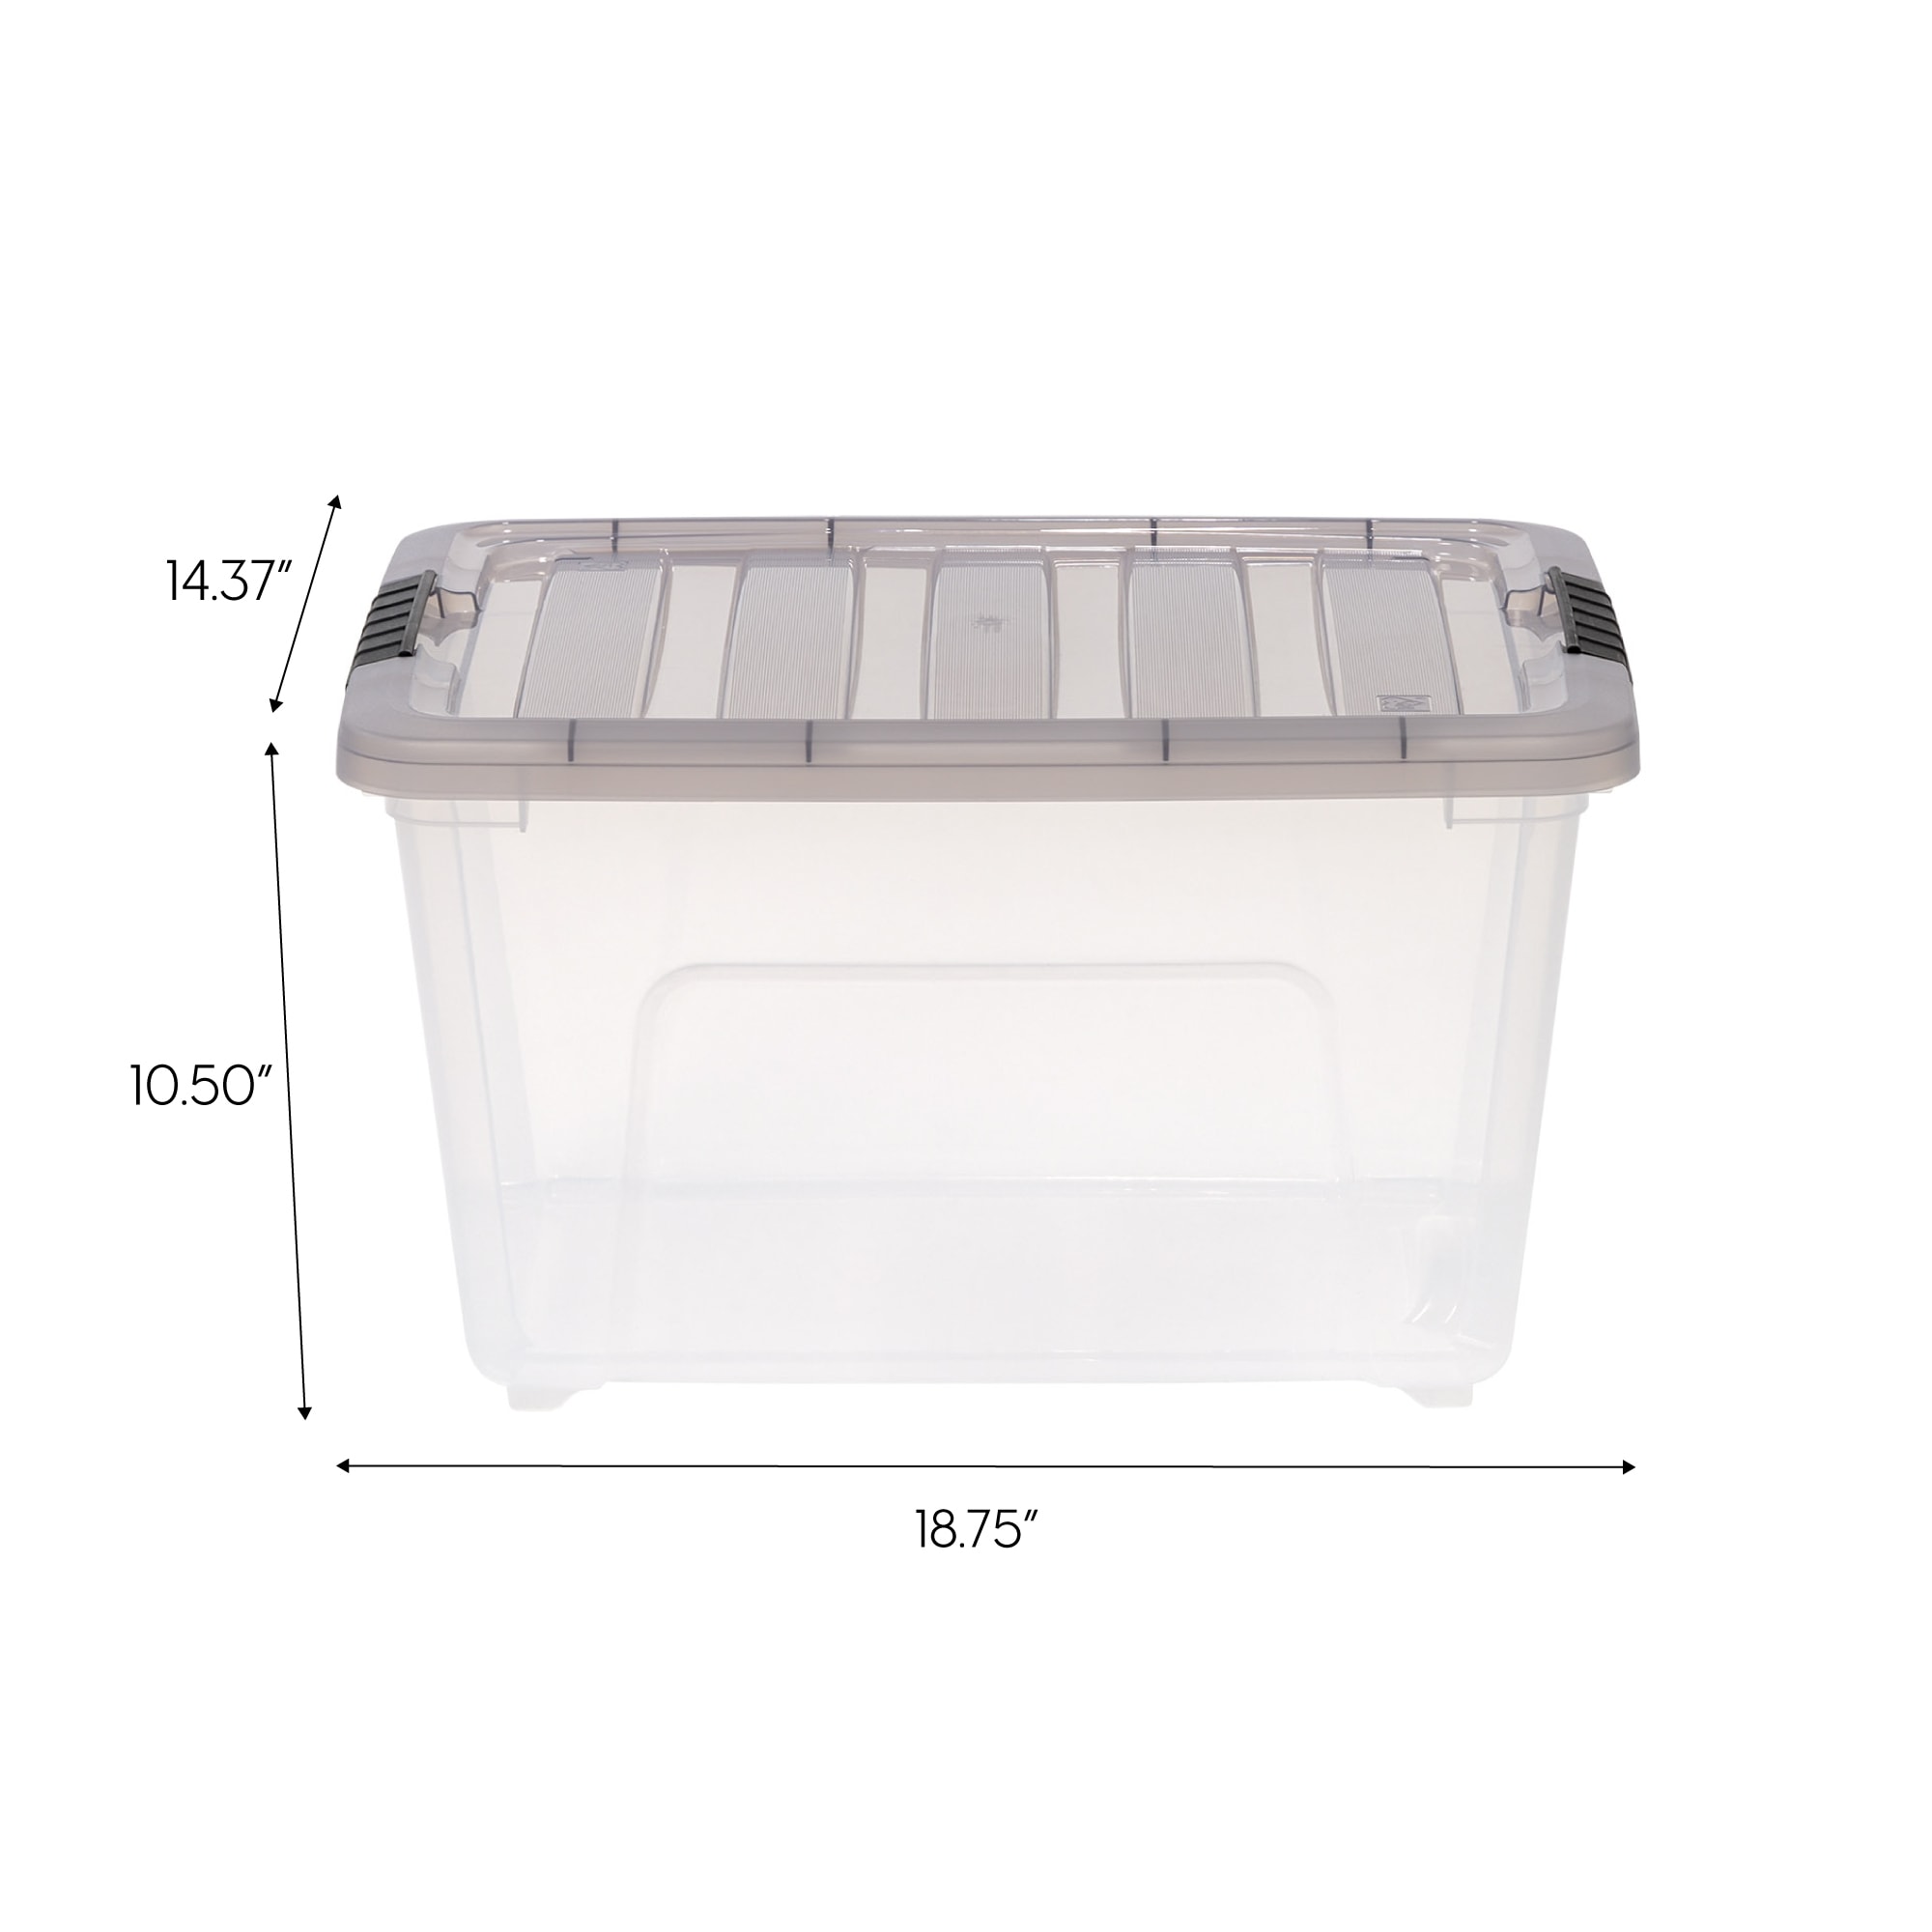 Yuright 3.5 qt Plastic Bin with Lid, Latching Box Tote, 4 Pack